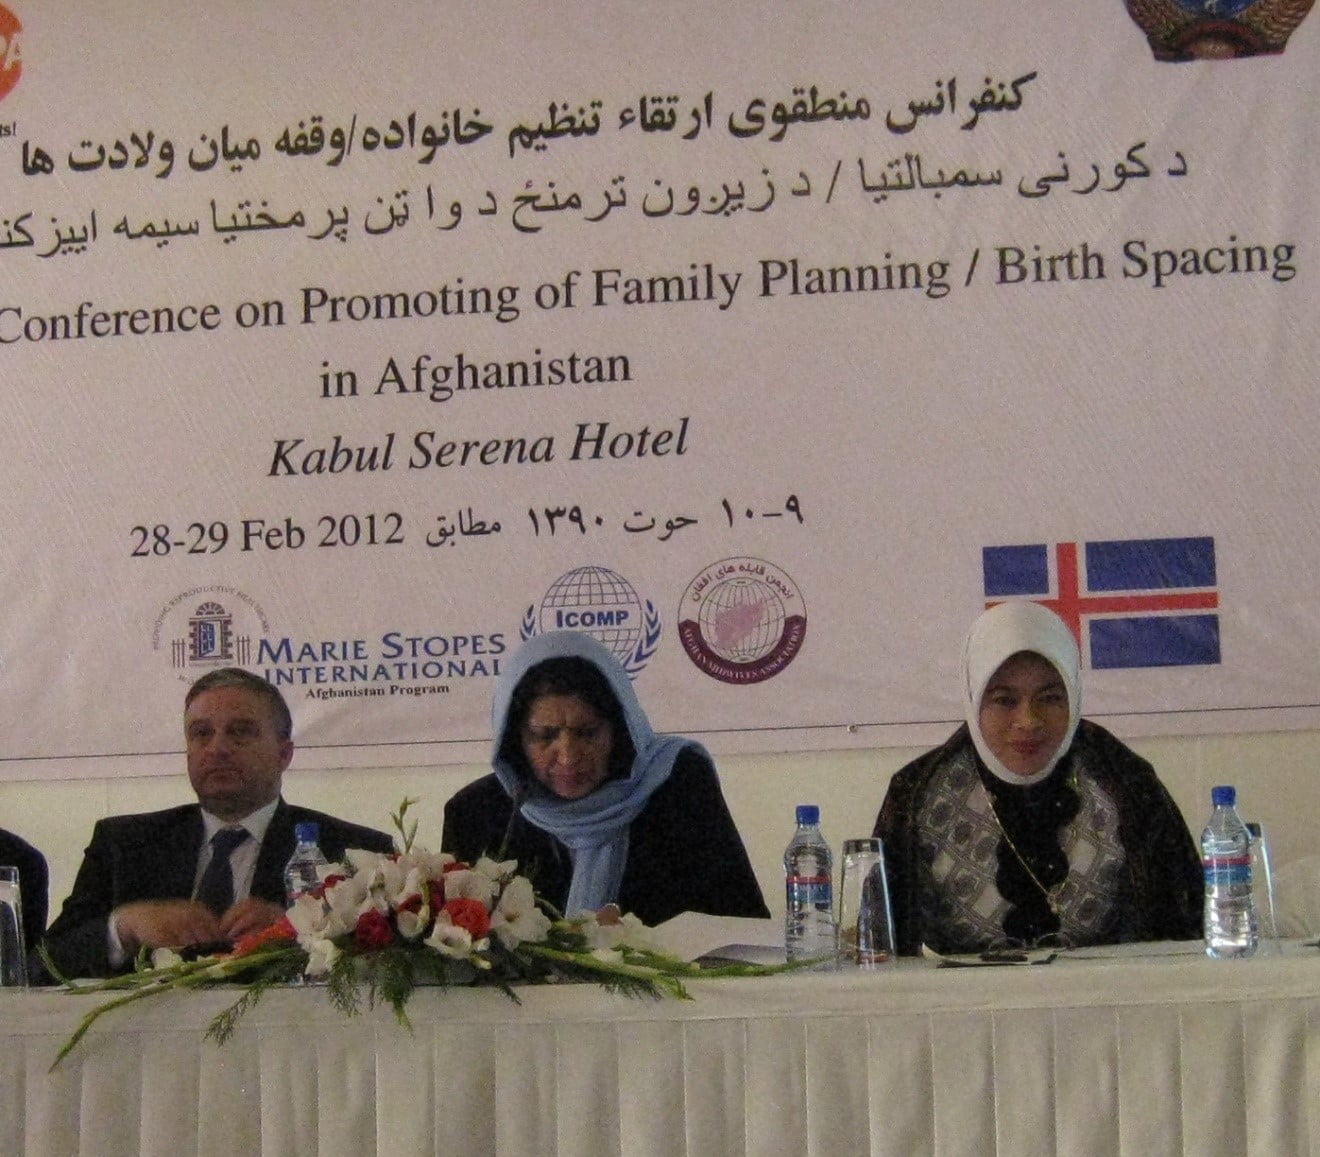 Musdah Mulia (right) at the Conference Promoting Family Planning and Birth Spacing in Afghanistan in 2012